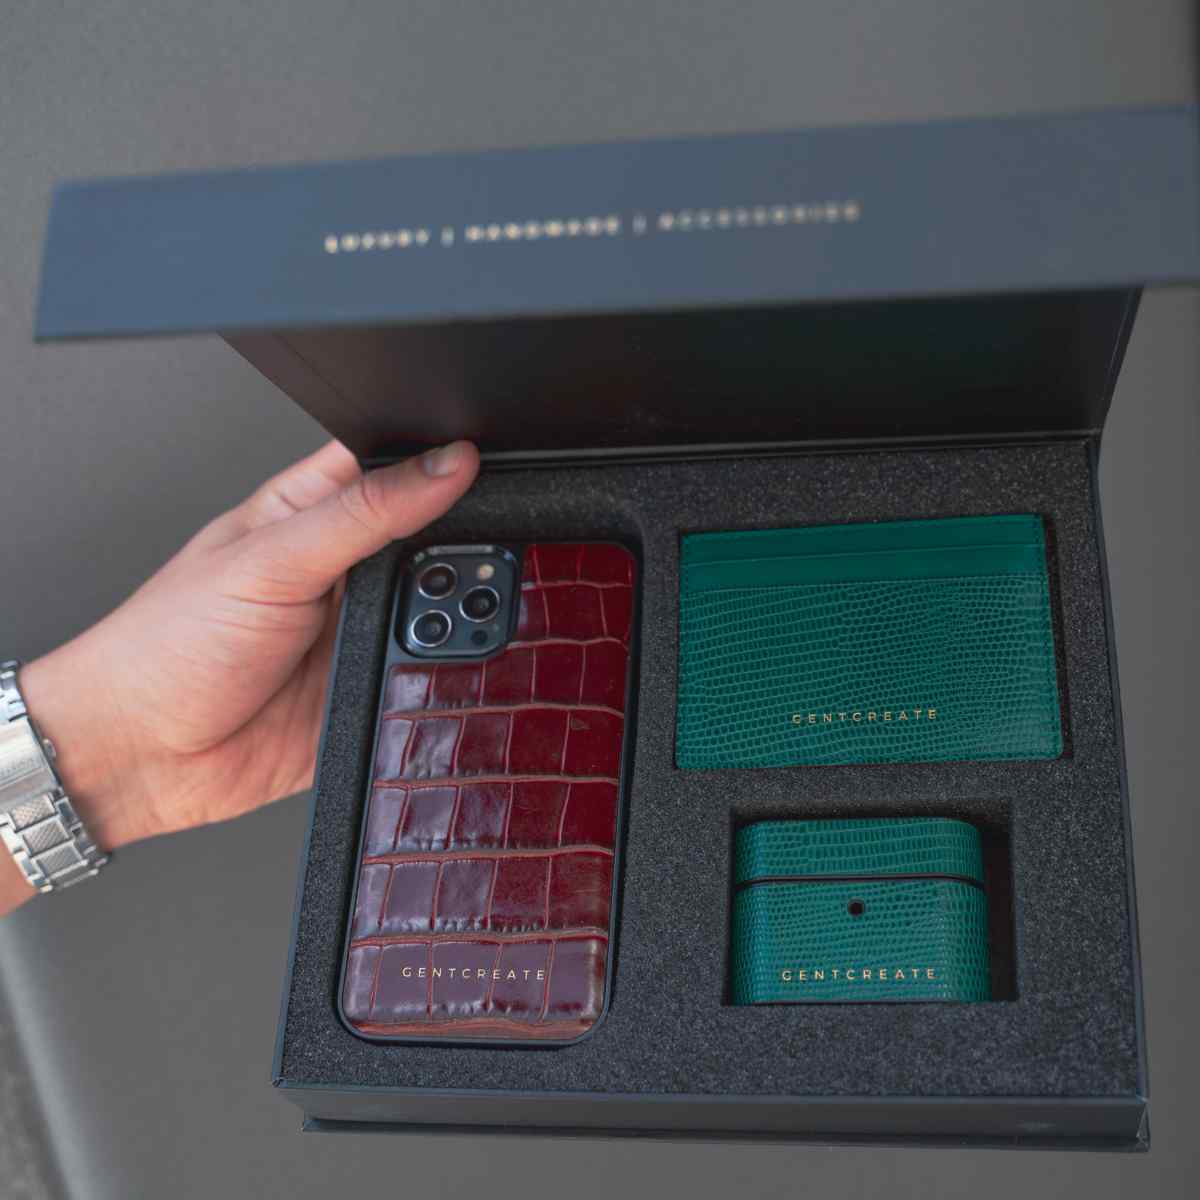 A man is holding a box from Gentcreate with luxury leather products inside, including an iPhone Leather Burgundy Case, a Green Cardholder and a Green AirPods case by Gentcreate